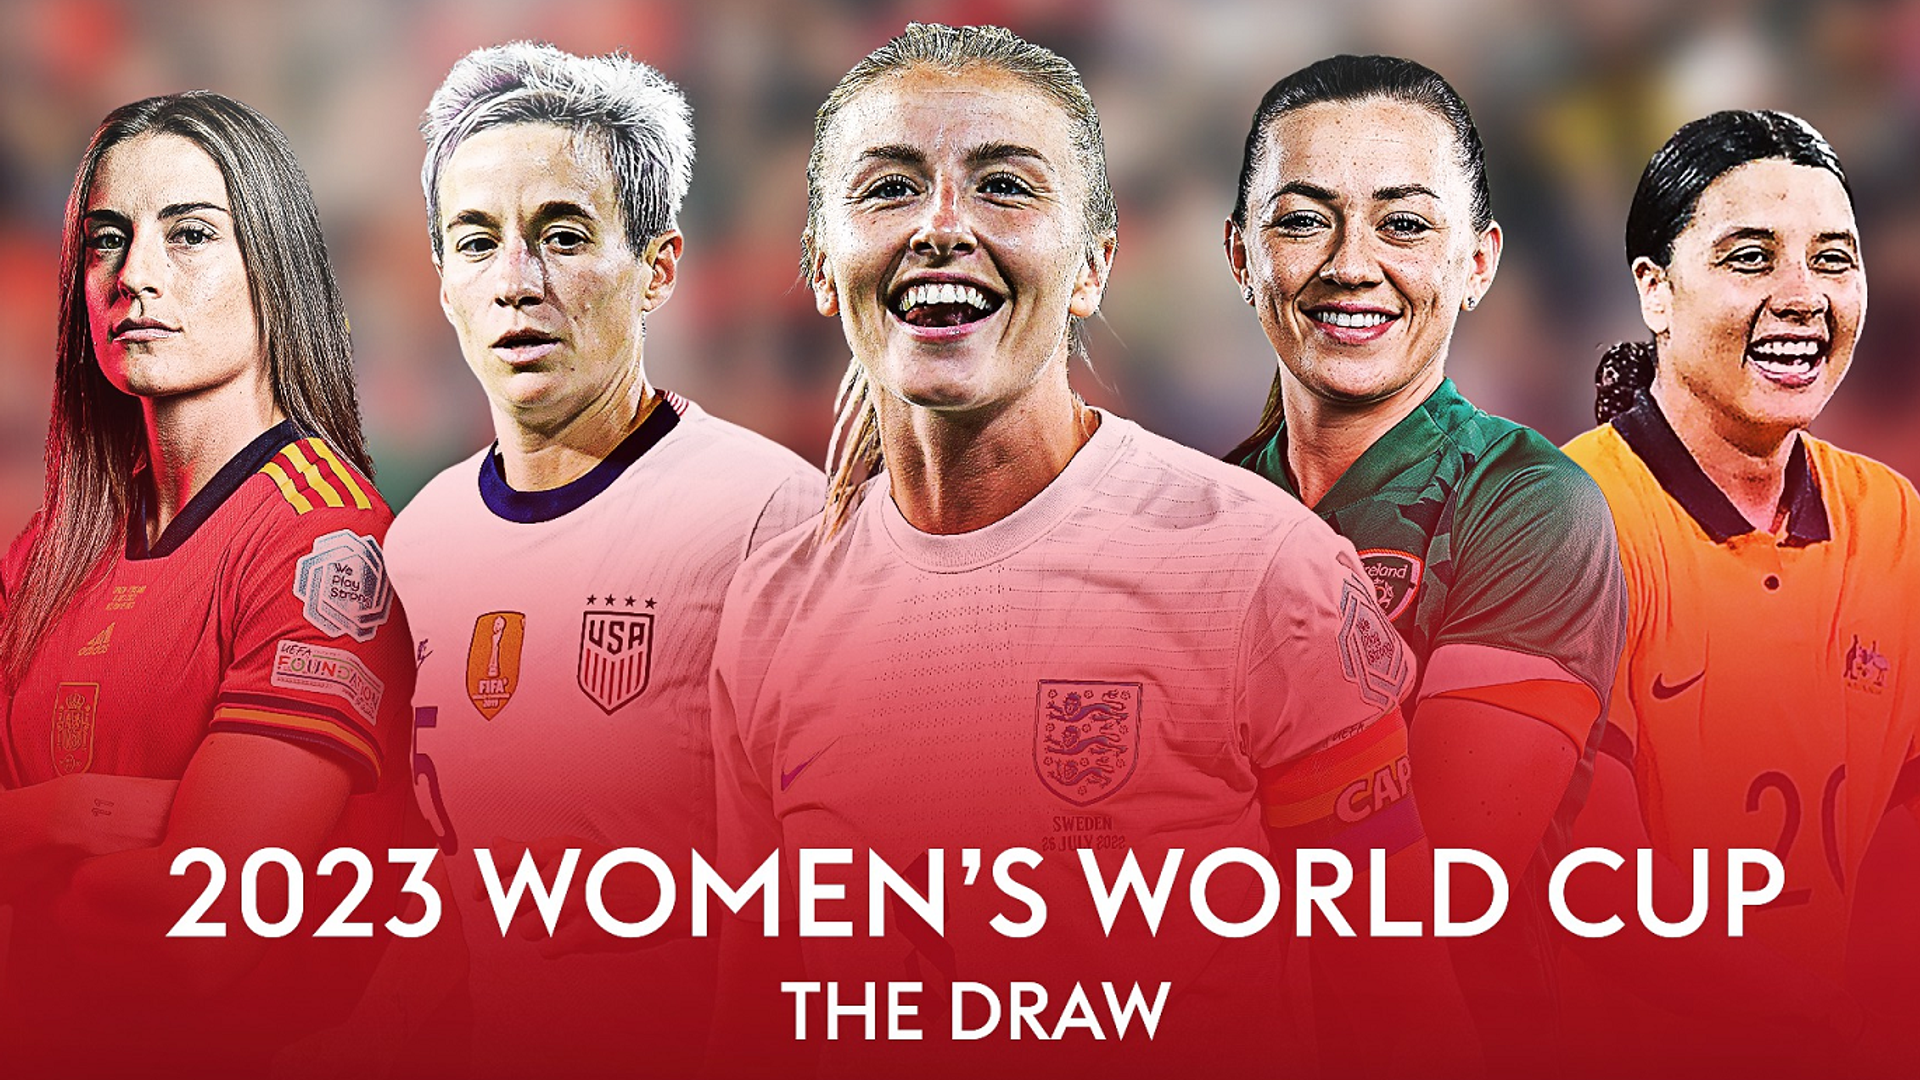 Women's World Cup 2023 draw: England to face Denmark and China